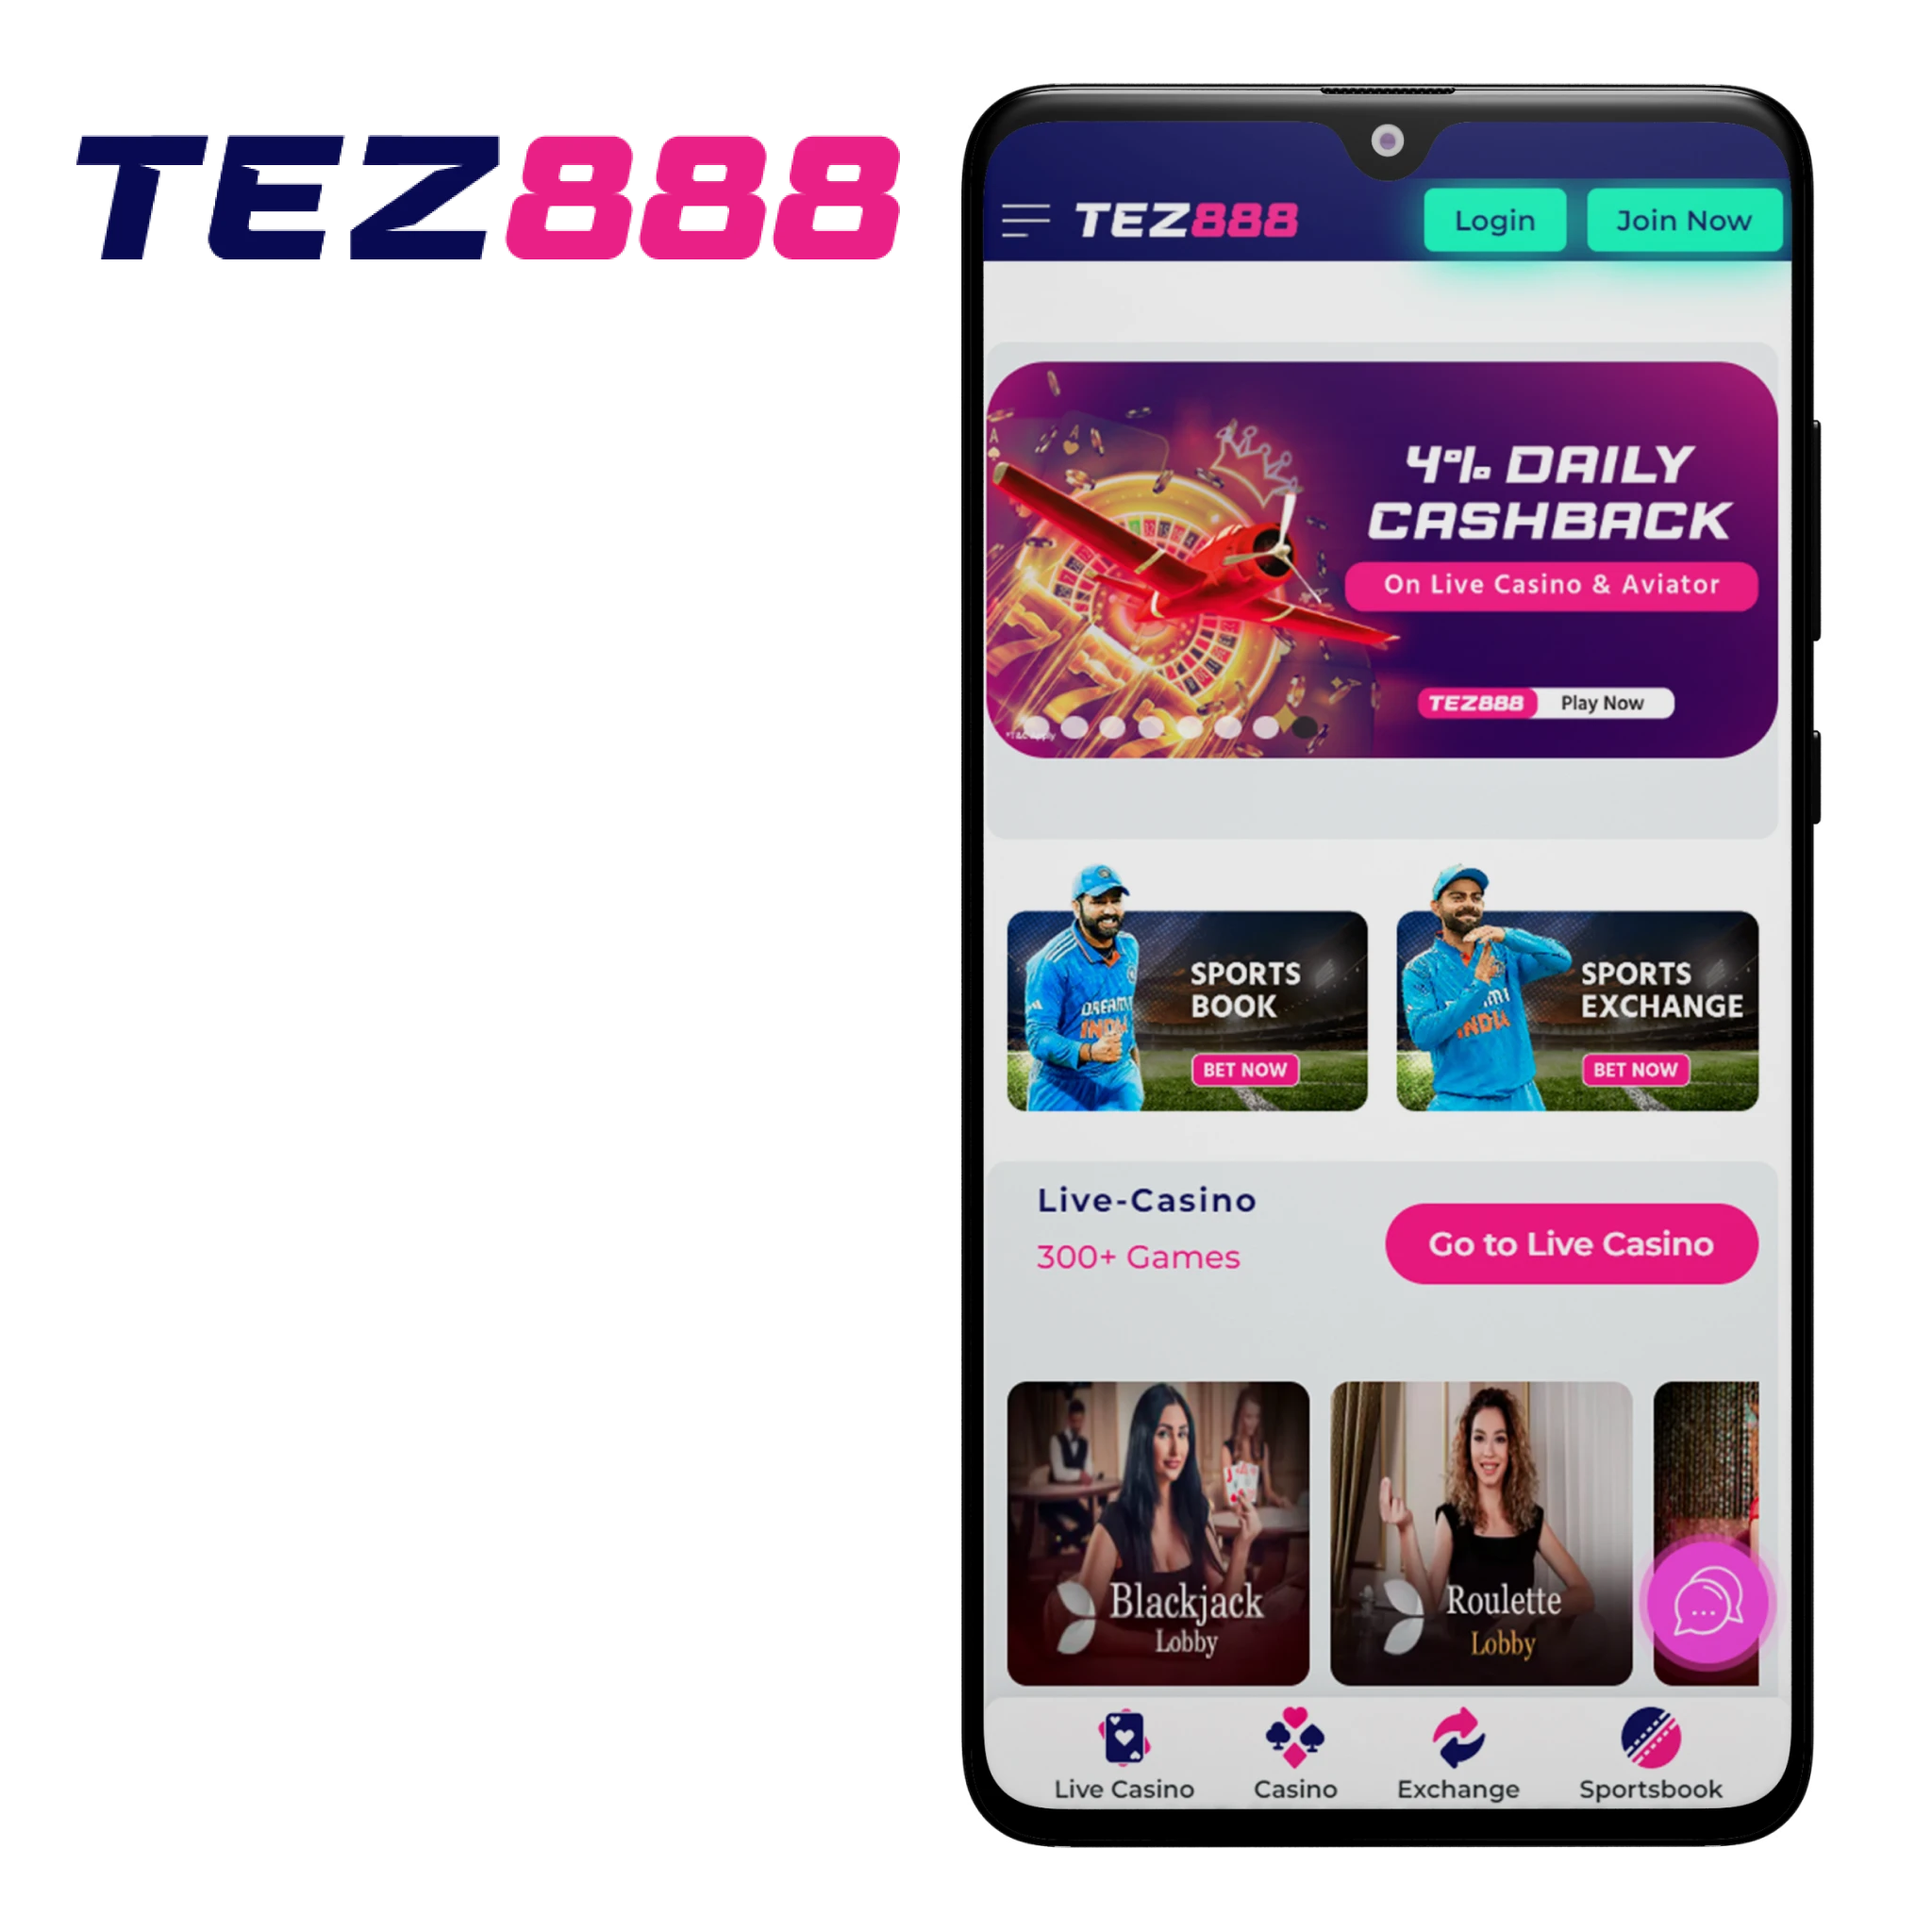 On the Tez888 app you can find popular deposit methods for cricket betting.